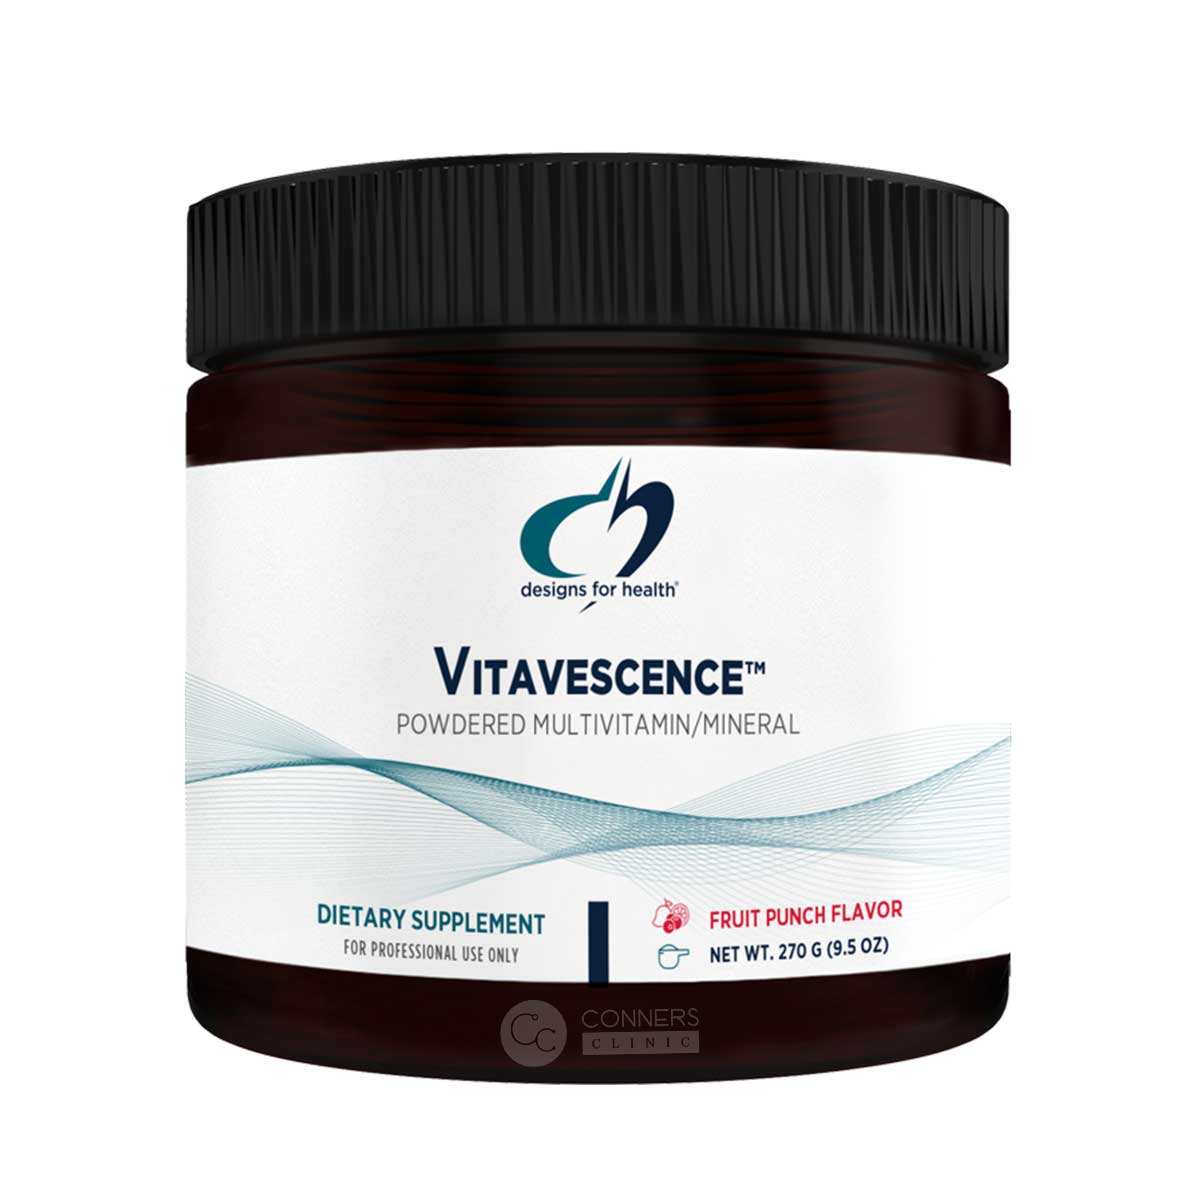 Vitavescence - 279 gm Powder - Fruit Punch Flavor Designs for Health Supplement - Conners Clinic